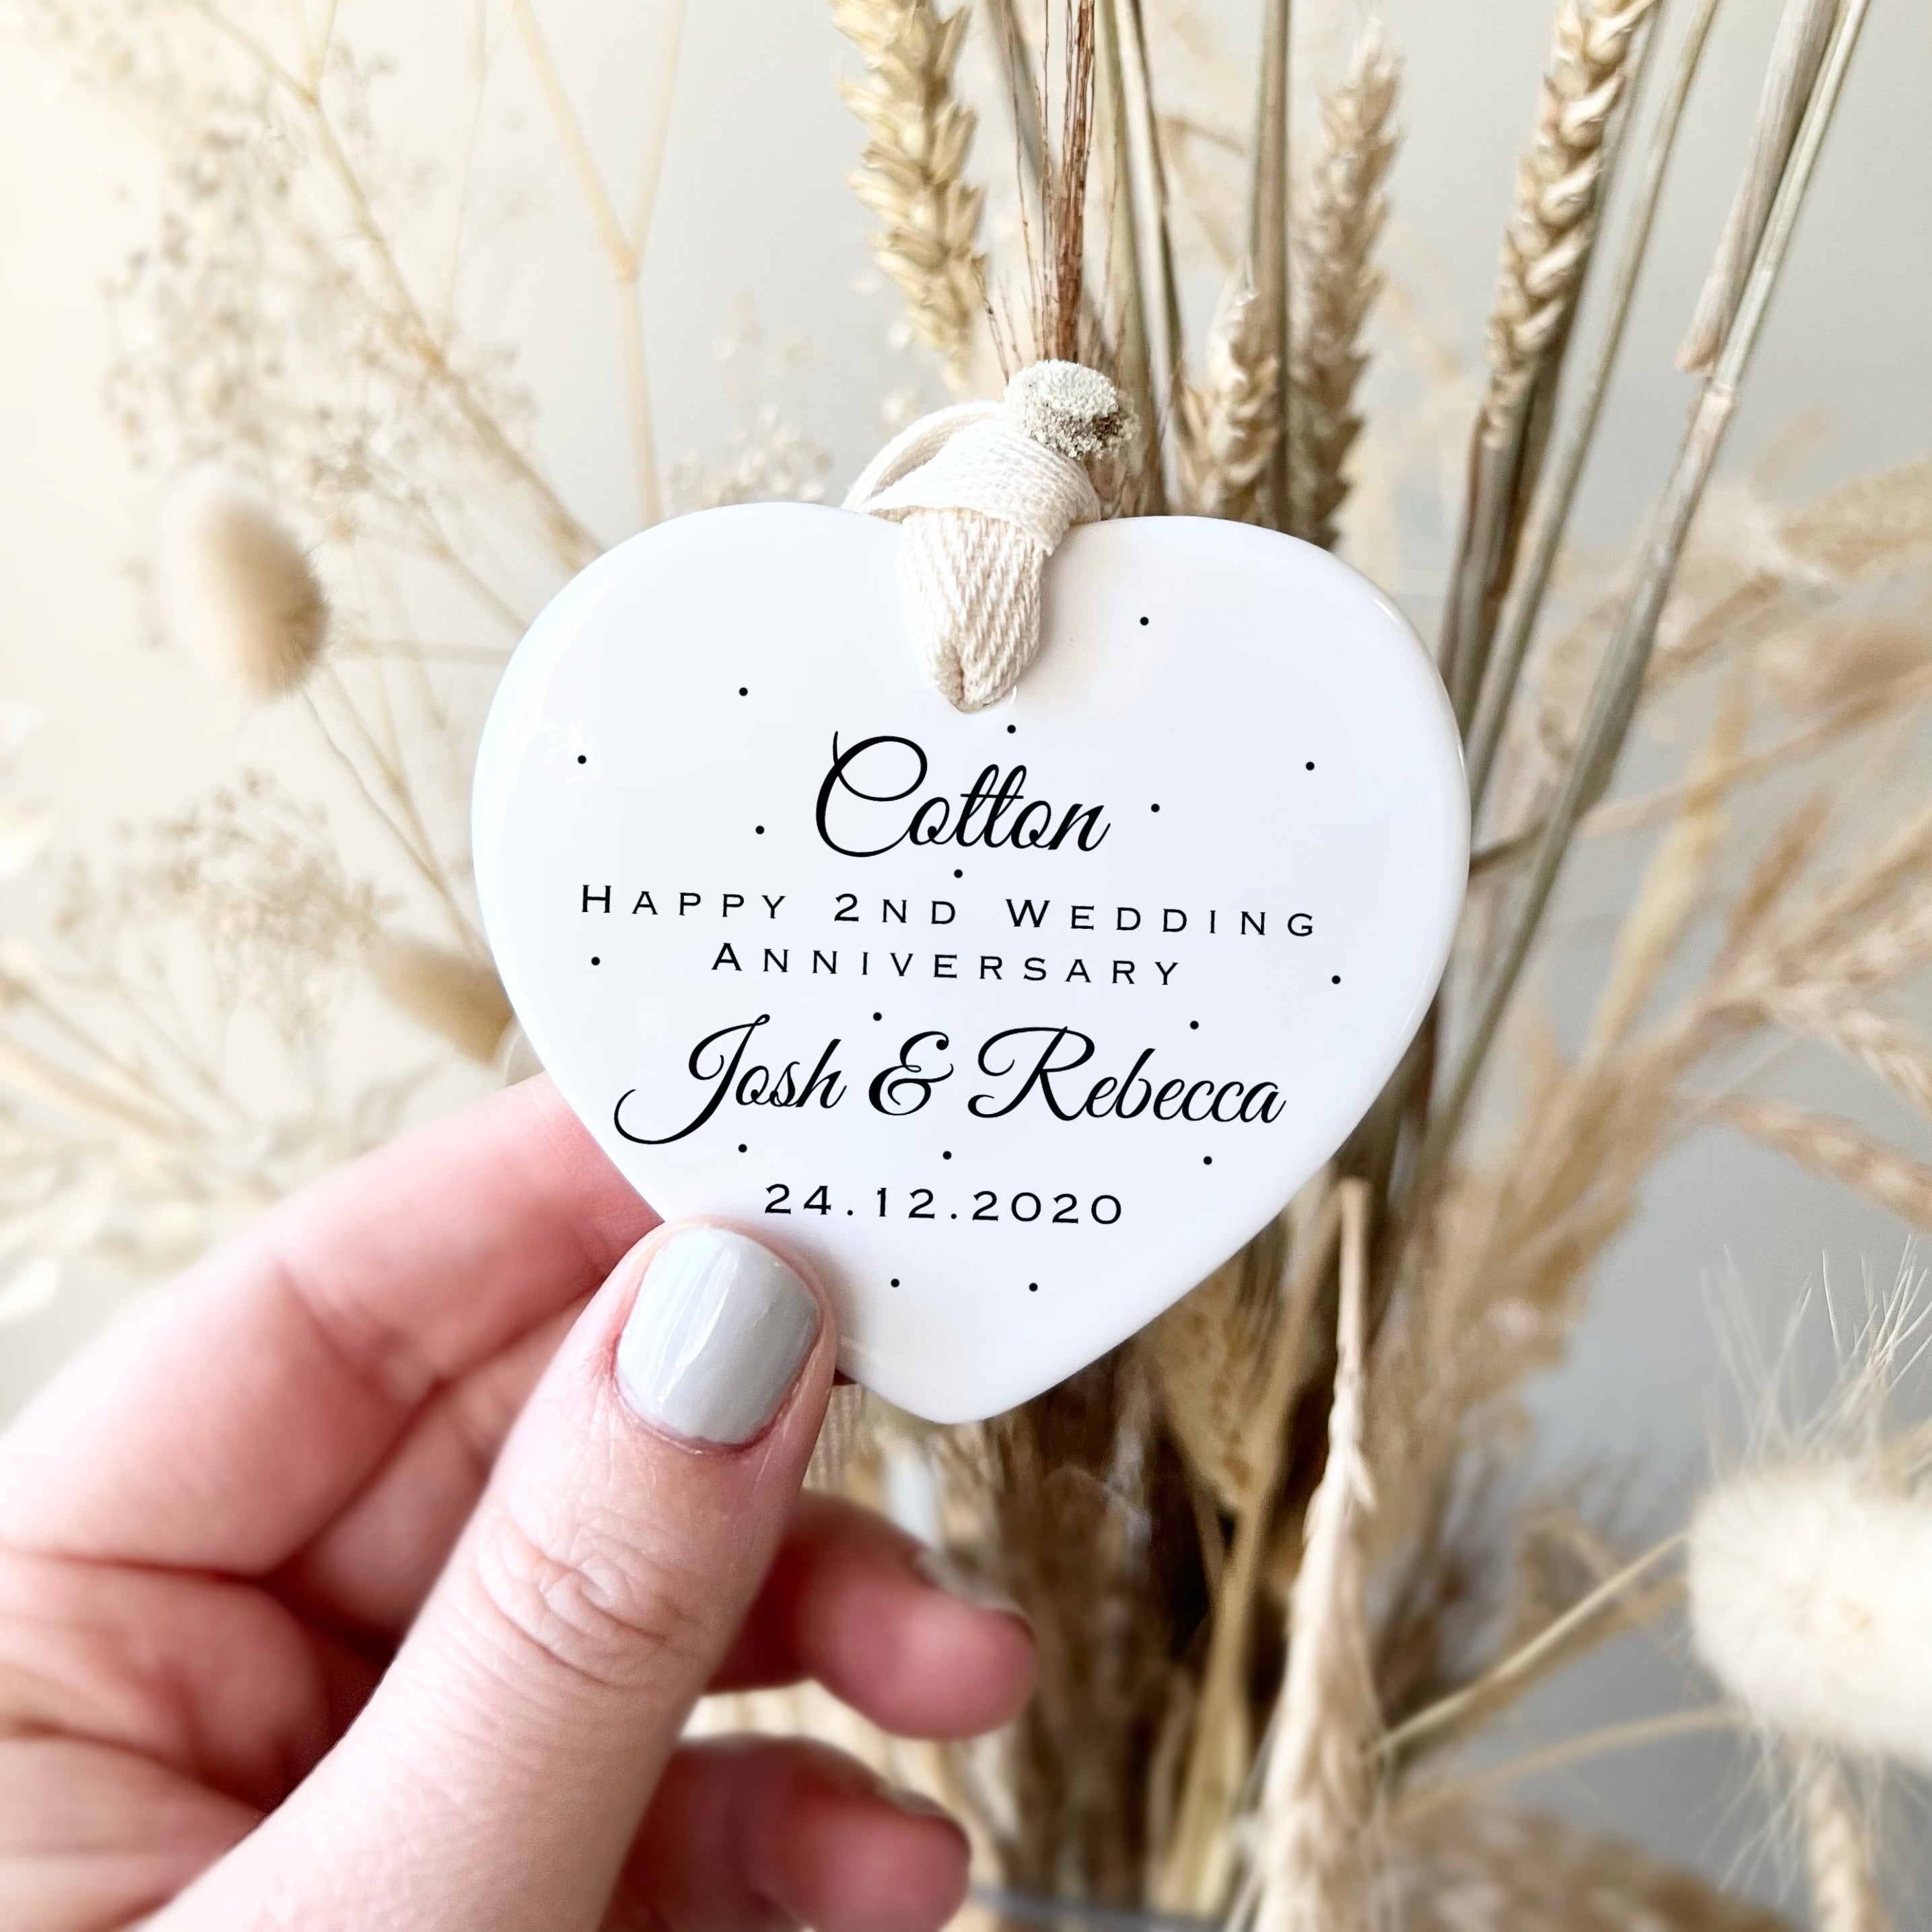 Second Wedding Anniversary Gift Ideas : Cotton, Lily of the Valley & Garnet  | Capitol Romance ~ Practical & Local DC Area Weddings